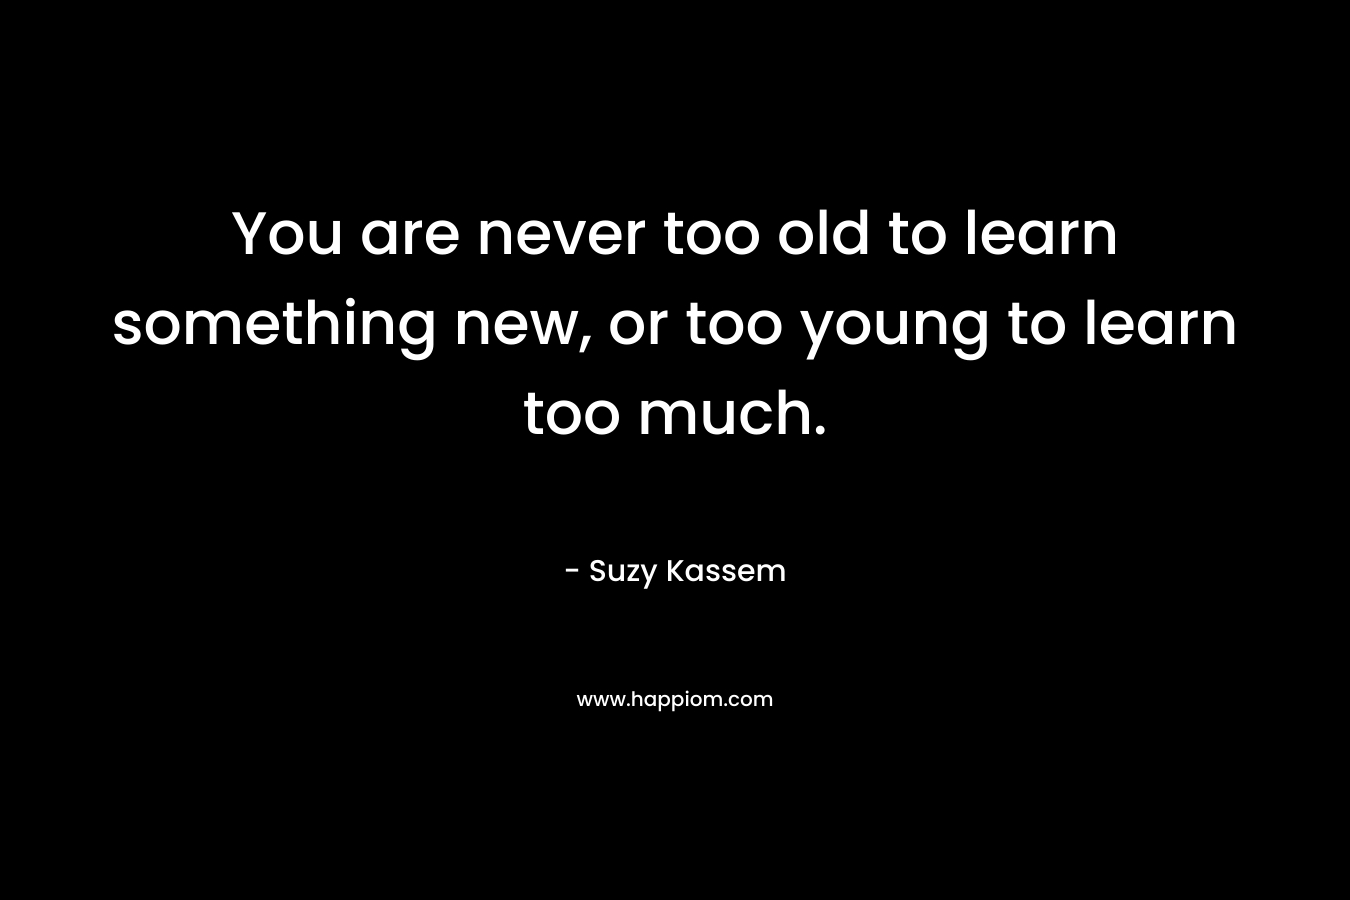 You are never too old to learn something new, or too young to learn too much.